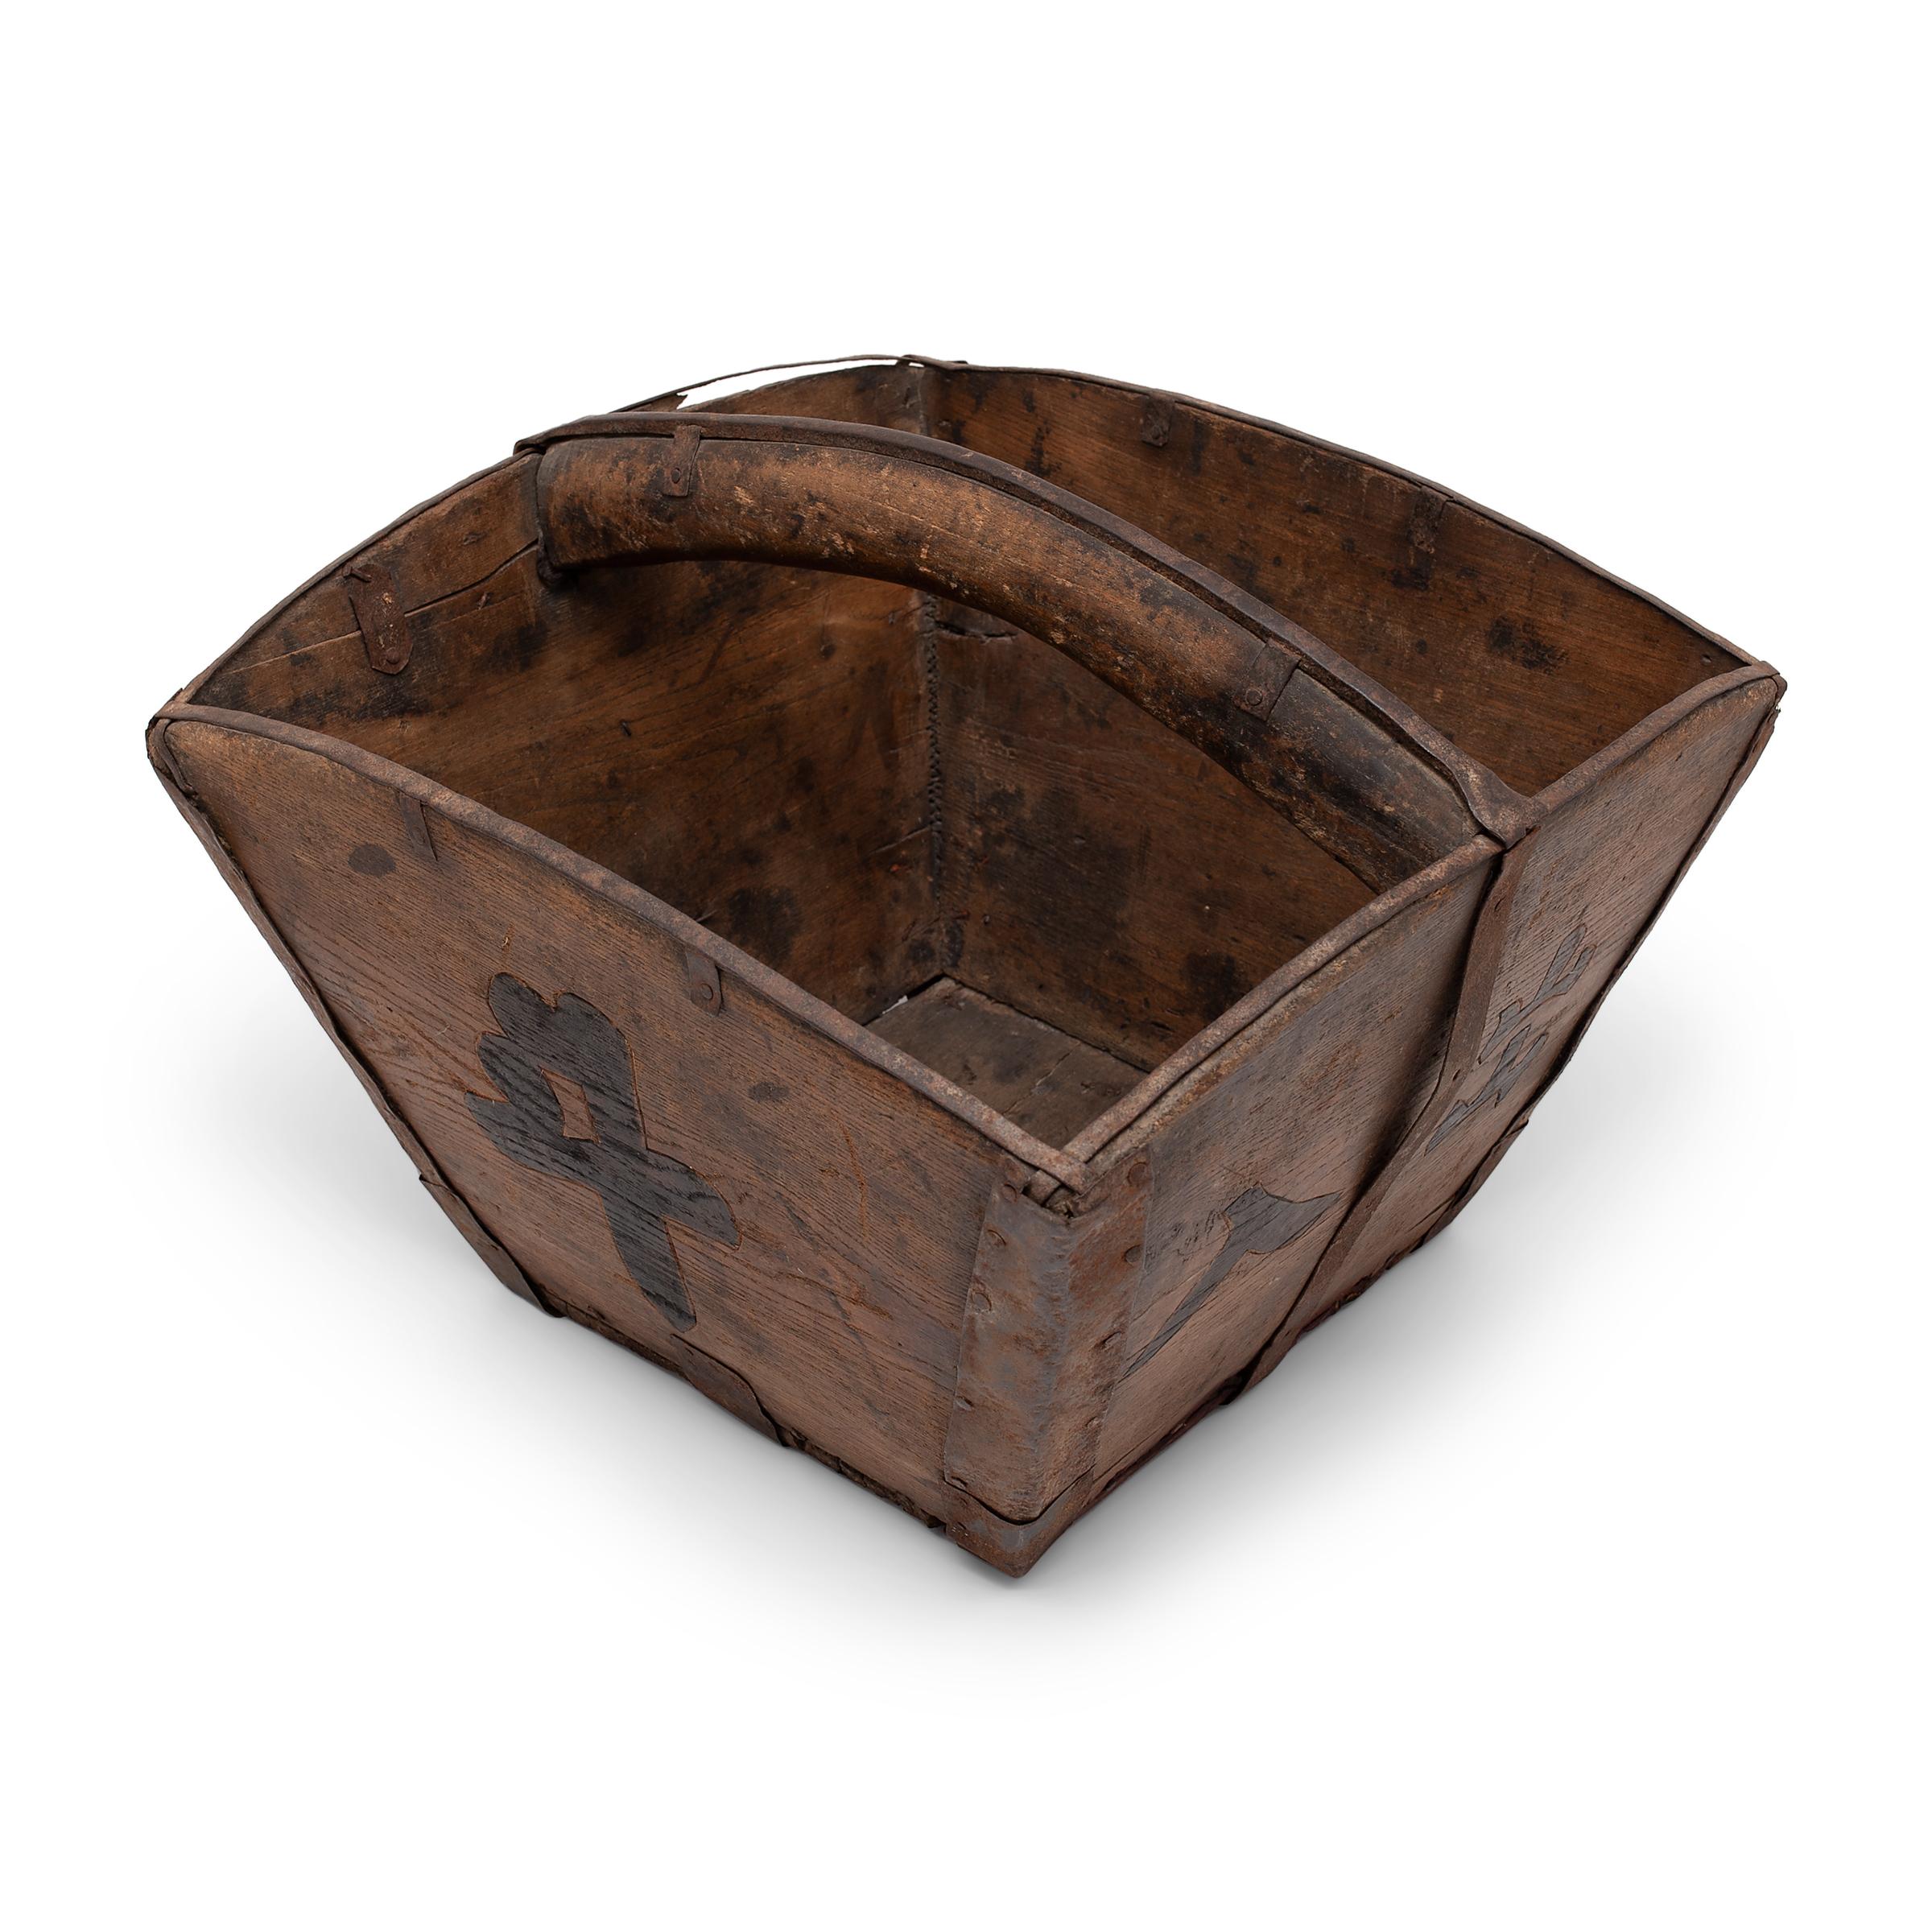 This rustic container was made over a hundred years ago to measure and hold a dou of rice, an ancient Chinese measurement. The wooden vessel has a squared form, hand-crafted with tapered sides and an arched top strengthened with iron trim. The flat